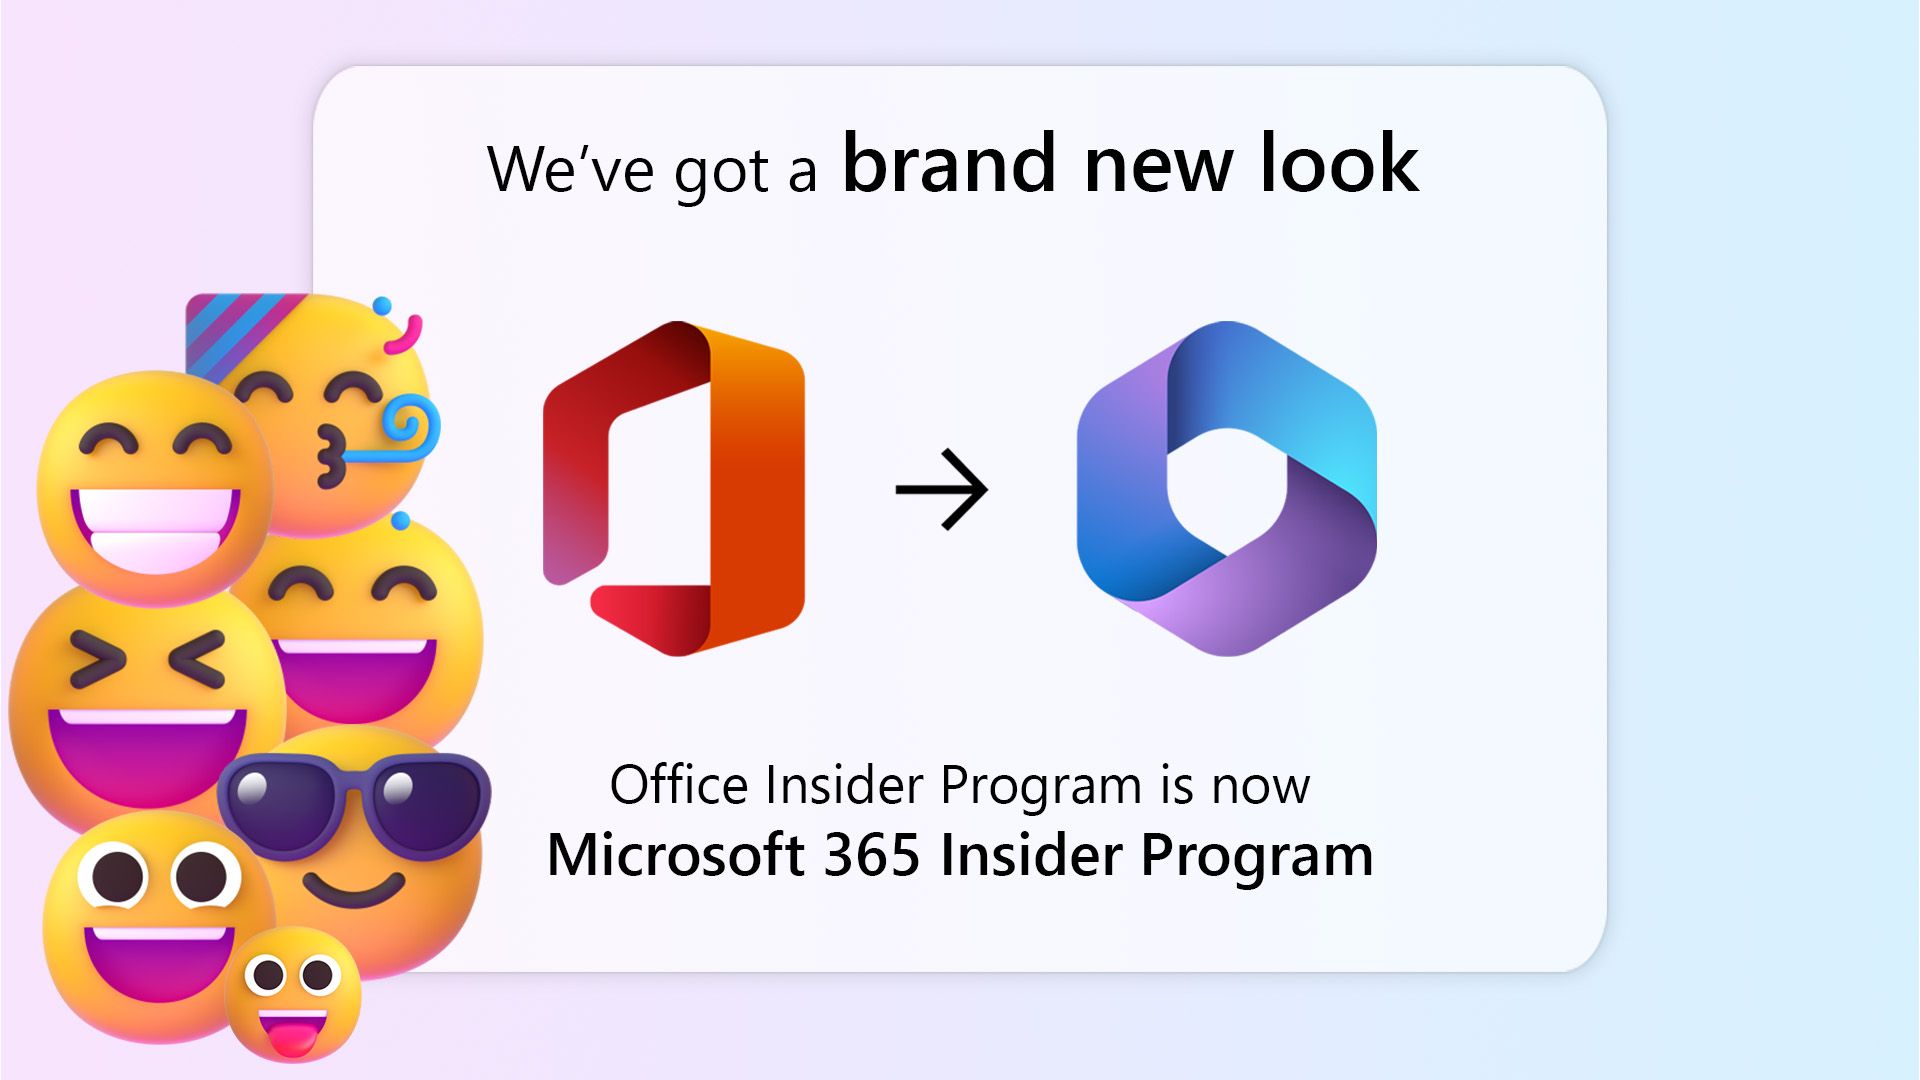 A Microsoft 365 Insider promotional poster, advertising the shift from the Office Insider Program to the Microsoft 365 Insider program.